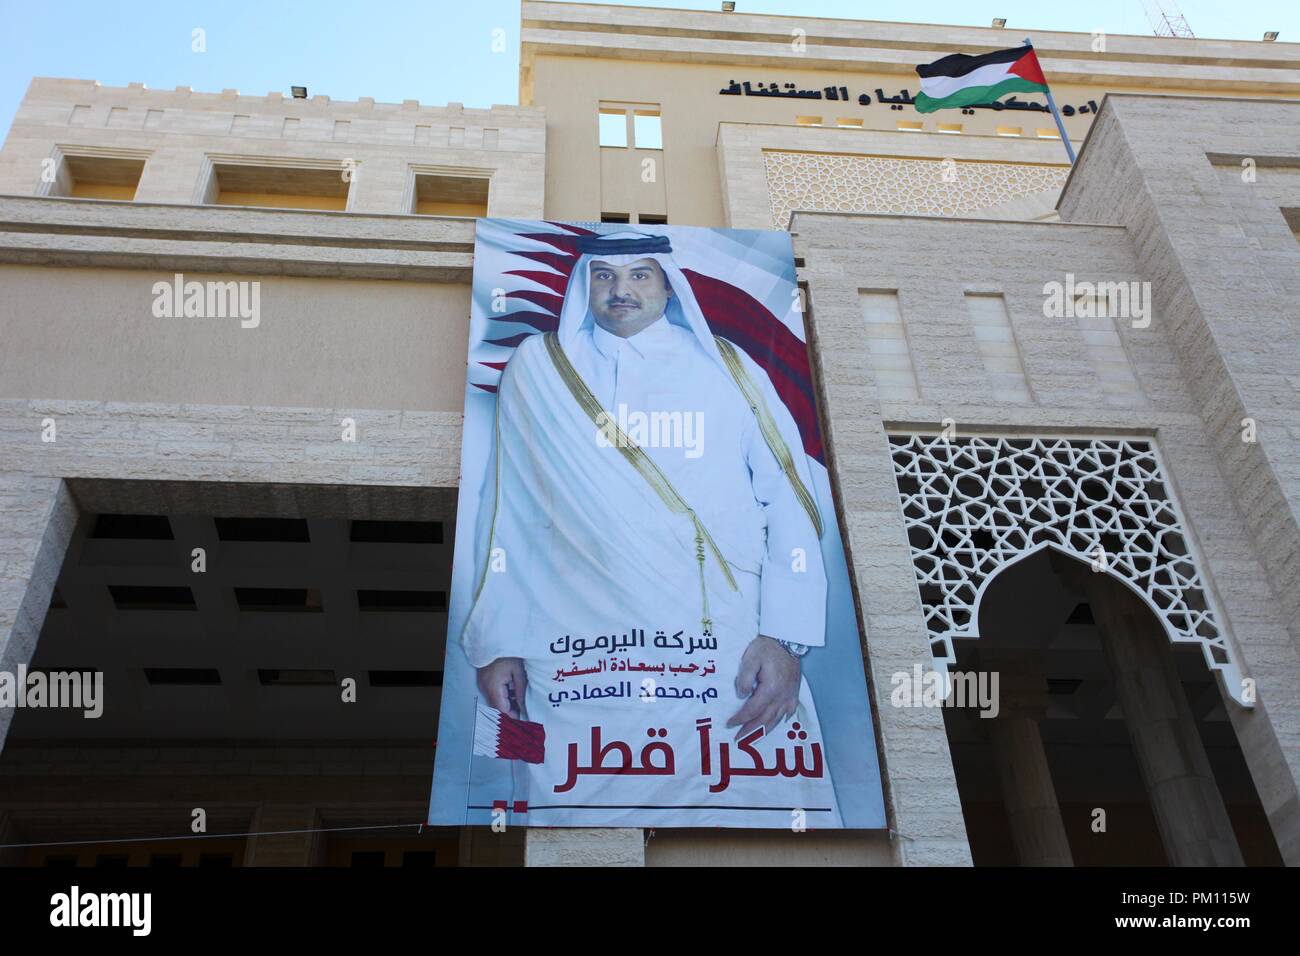 gaza-city-gaza-strip-palestinian-territory-16th-sep-2018-a-picture-taken-on-september-16-2018-shows-a-poster-of-emir-of-qatar-sheikh-tamim-bin-hamad-al-thani-placed-on-new-headquarters-of-the-superior-committee-of-justice-which-was-funded-by-qatar-in-south-of-gaza-city-credit-mahmoud-ajourapa-imageszuma-wirealamy-live-news-PM115W.jpg